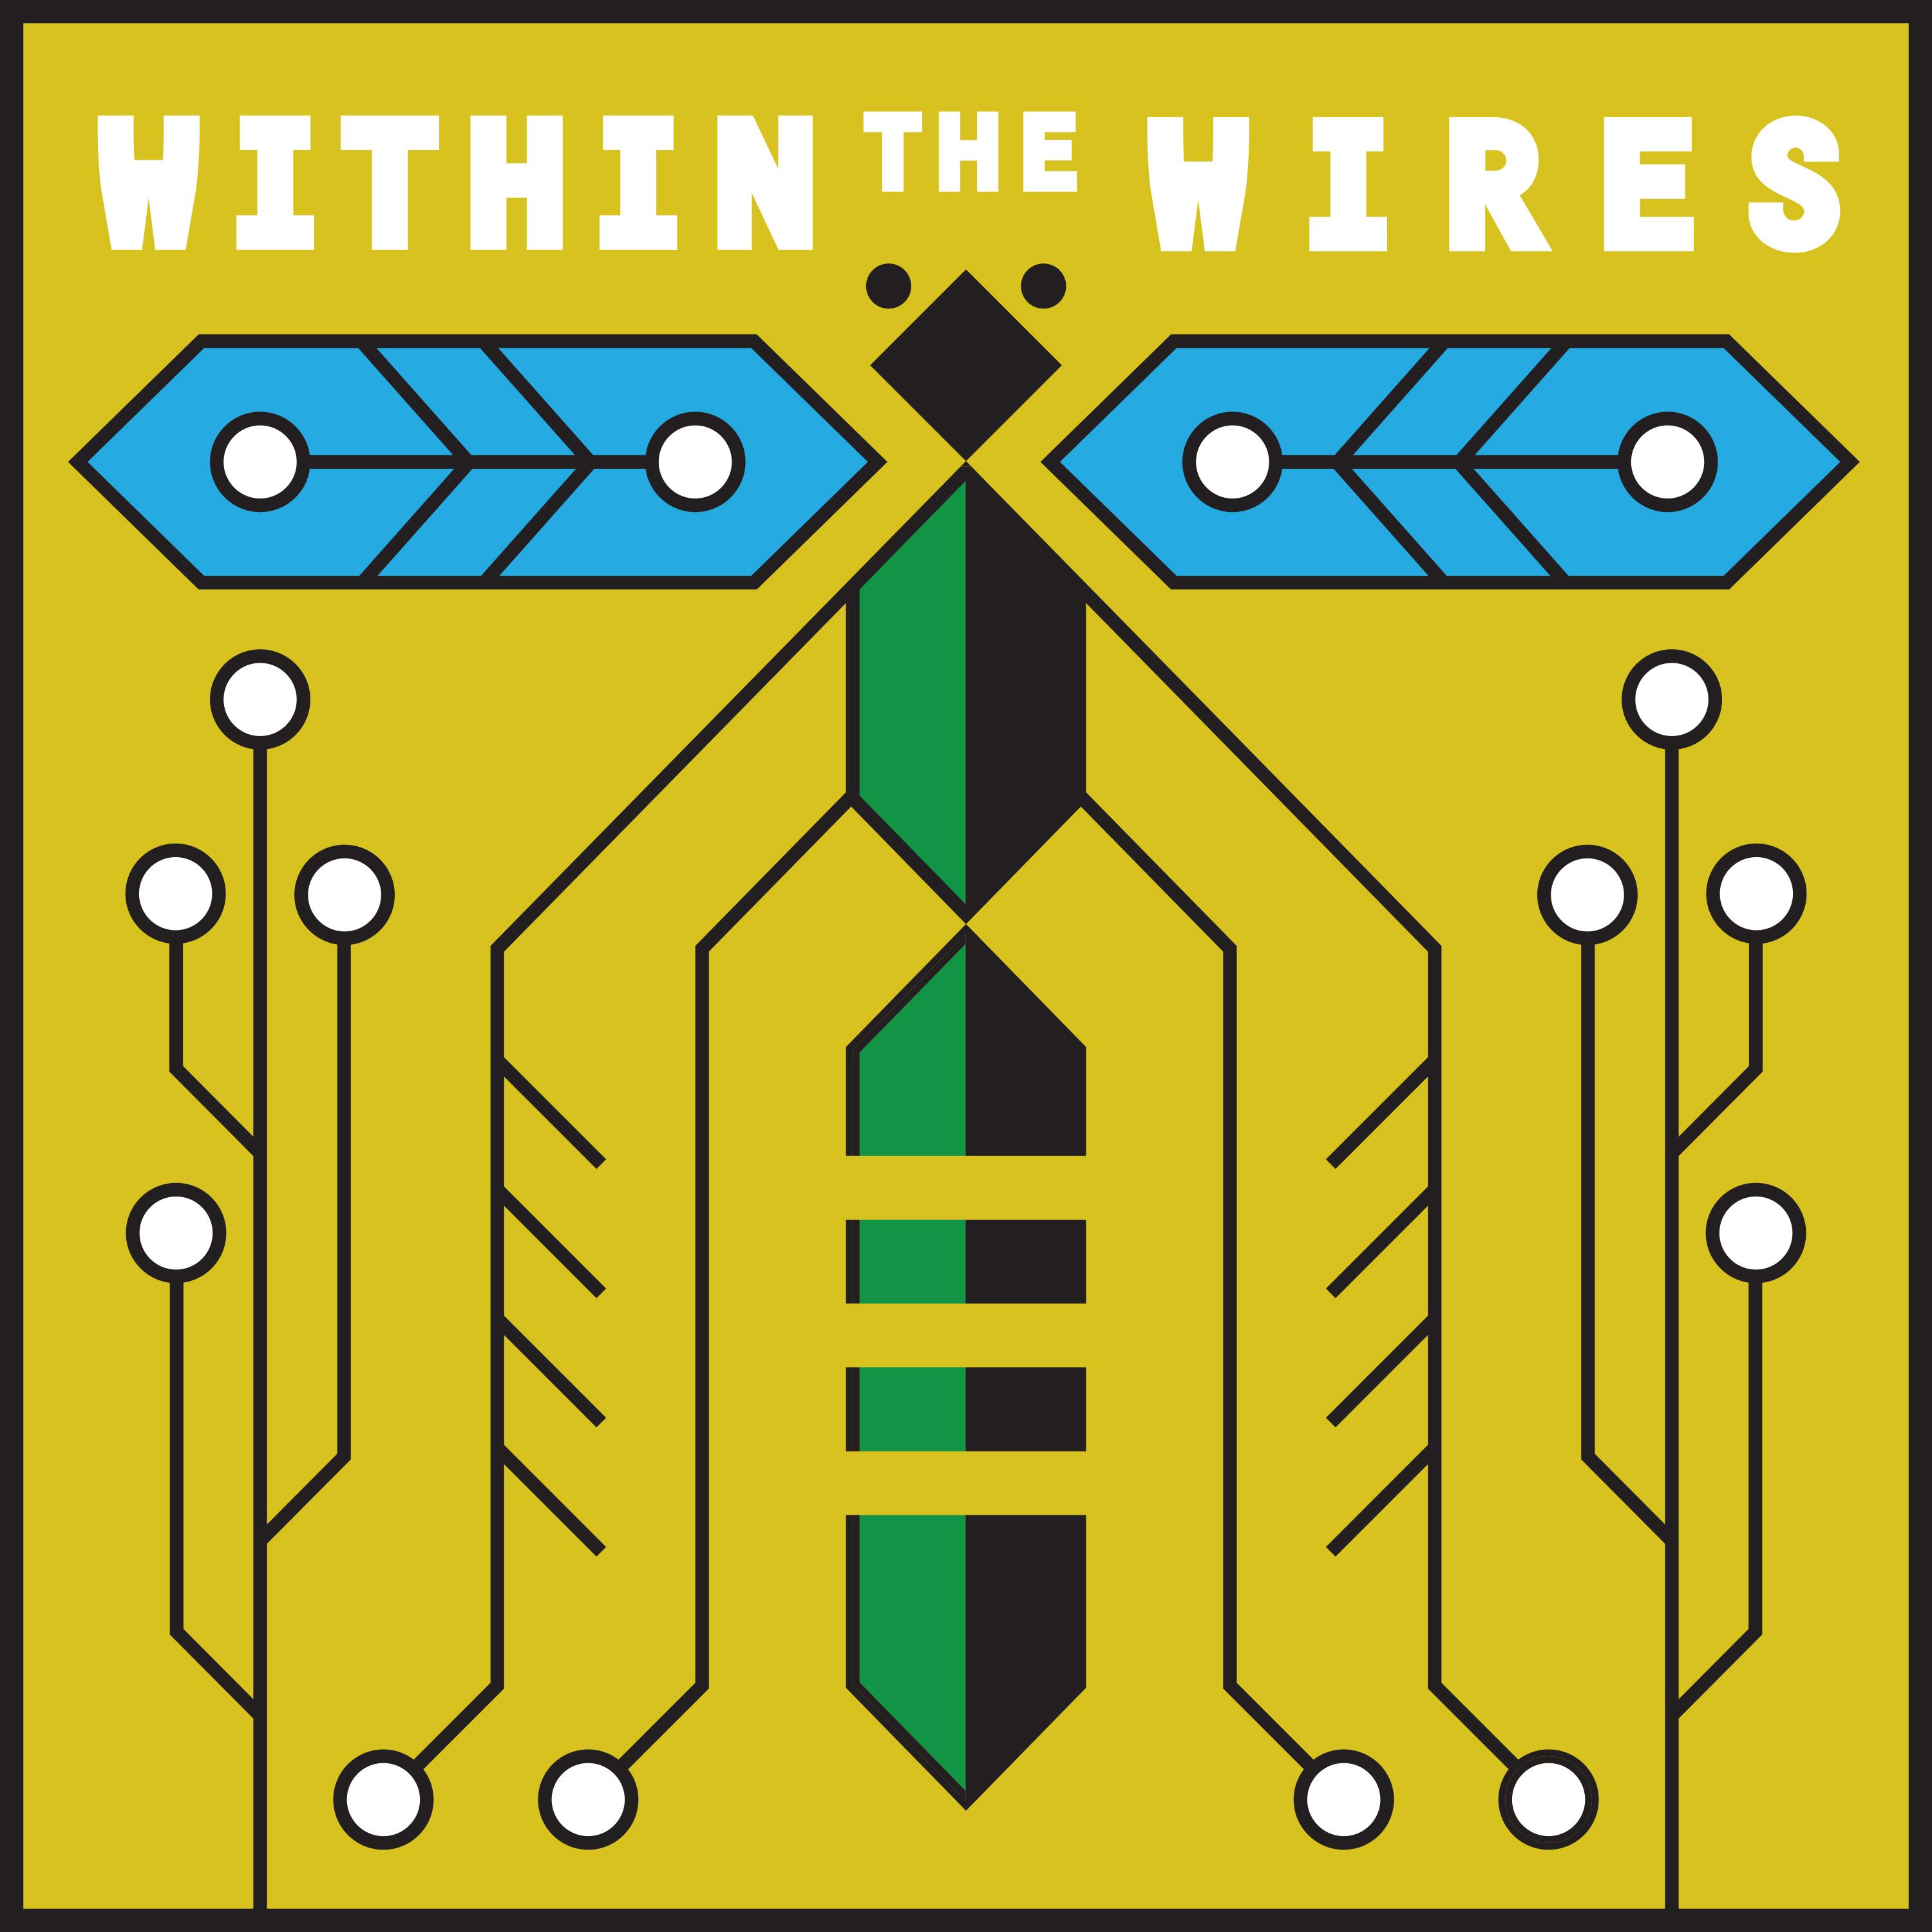 Thumbnail for "Within the Wires Live Show Announcement".